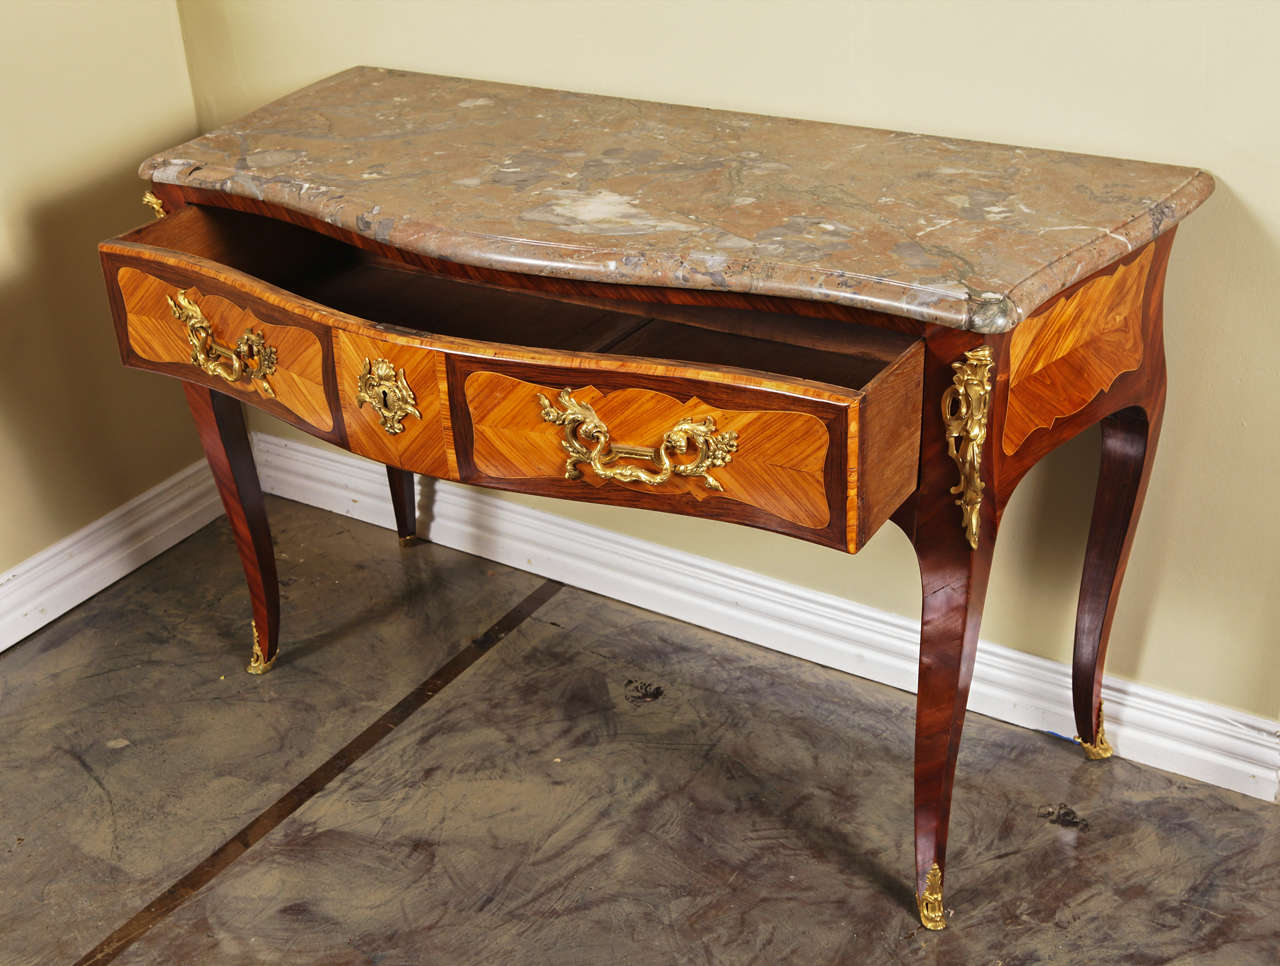 Wood A Late 18th to Early 19th Century French Louis XV Console For Sale